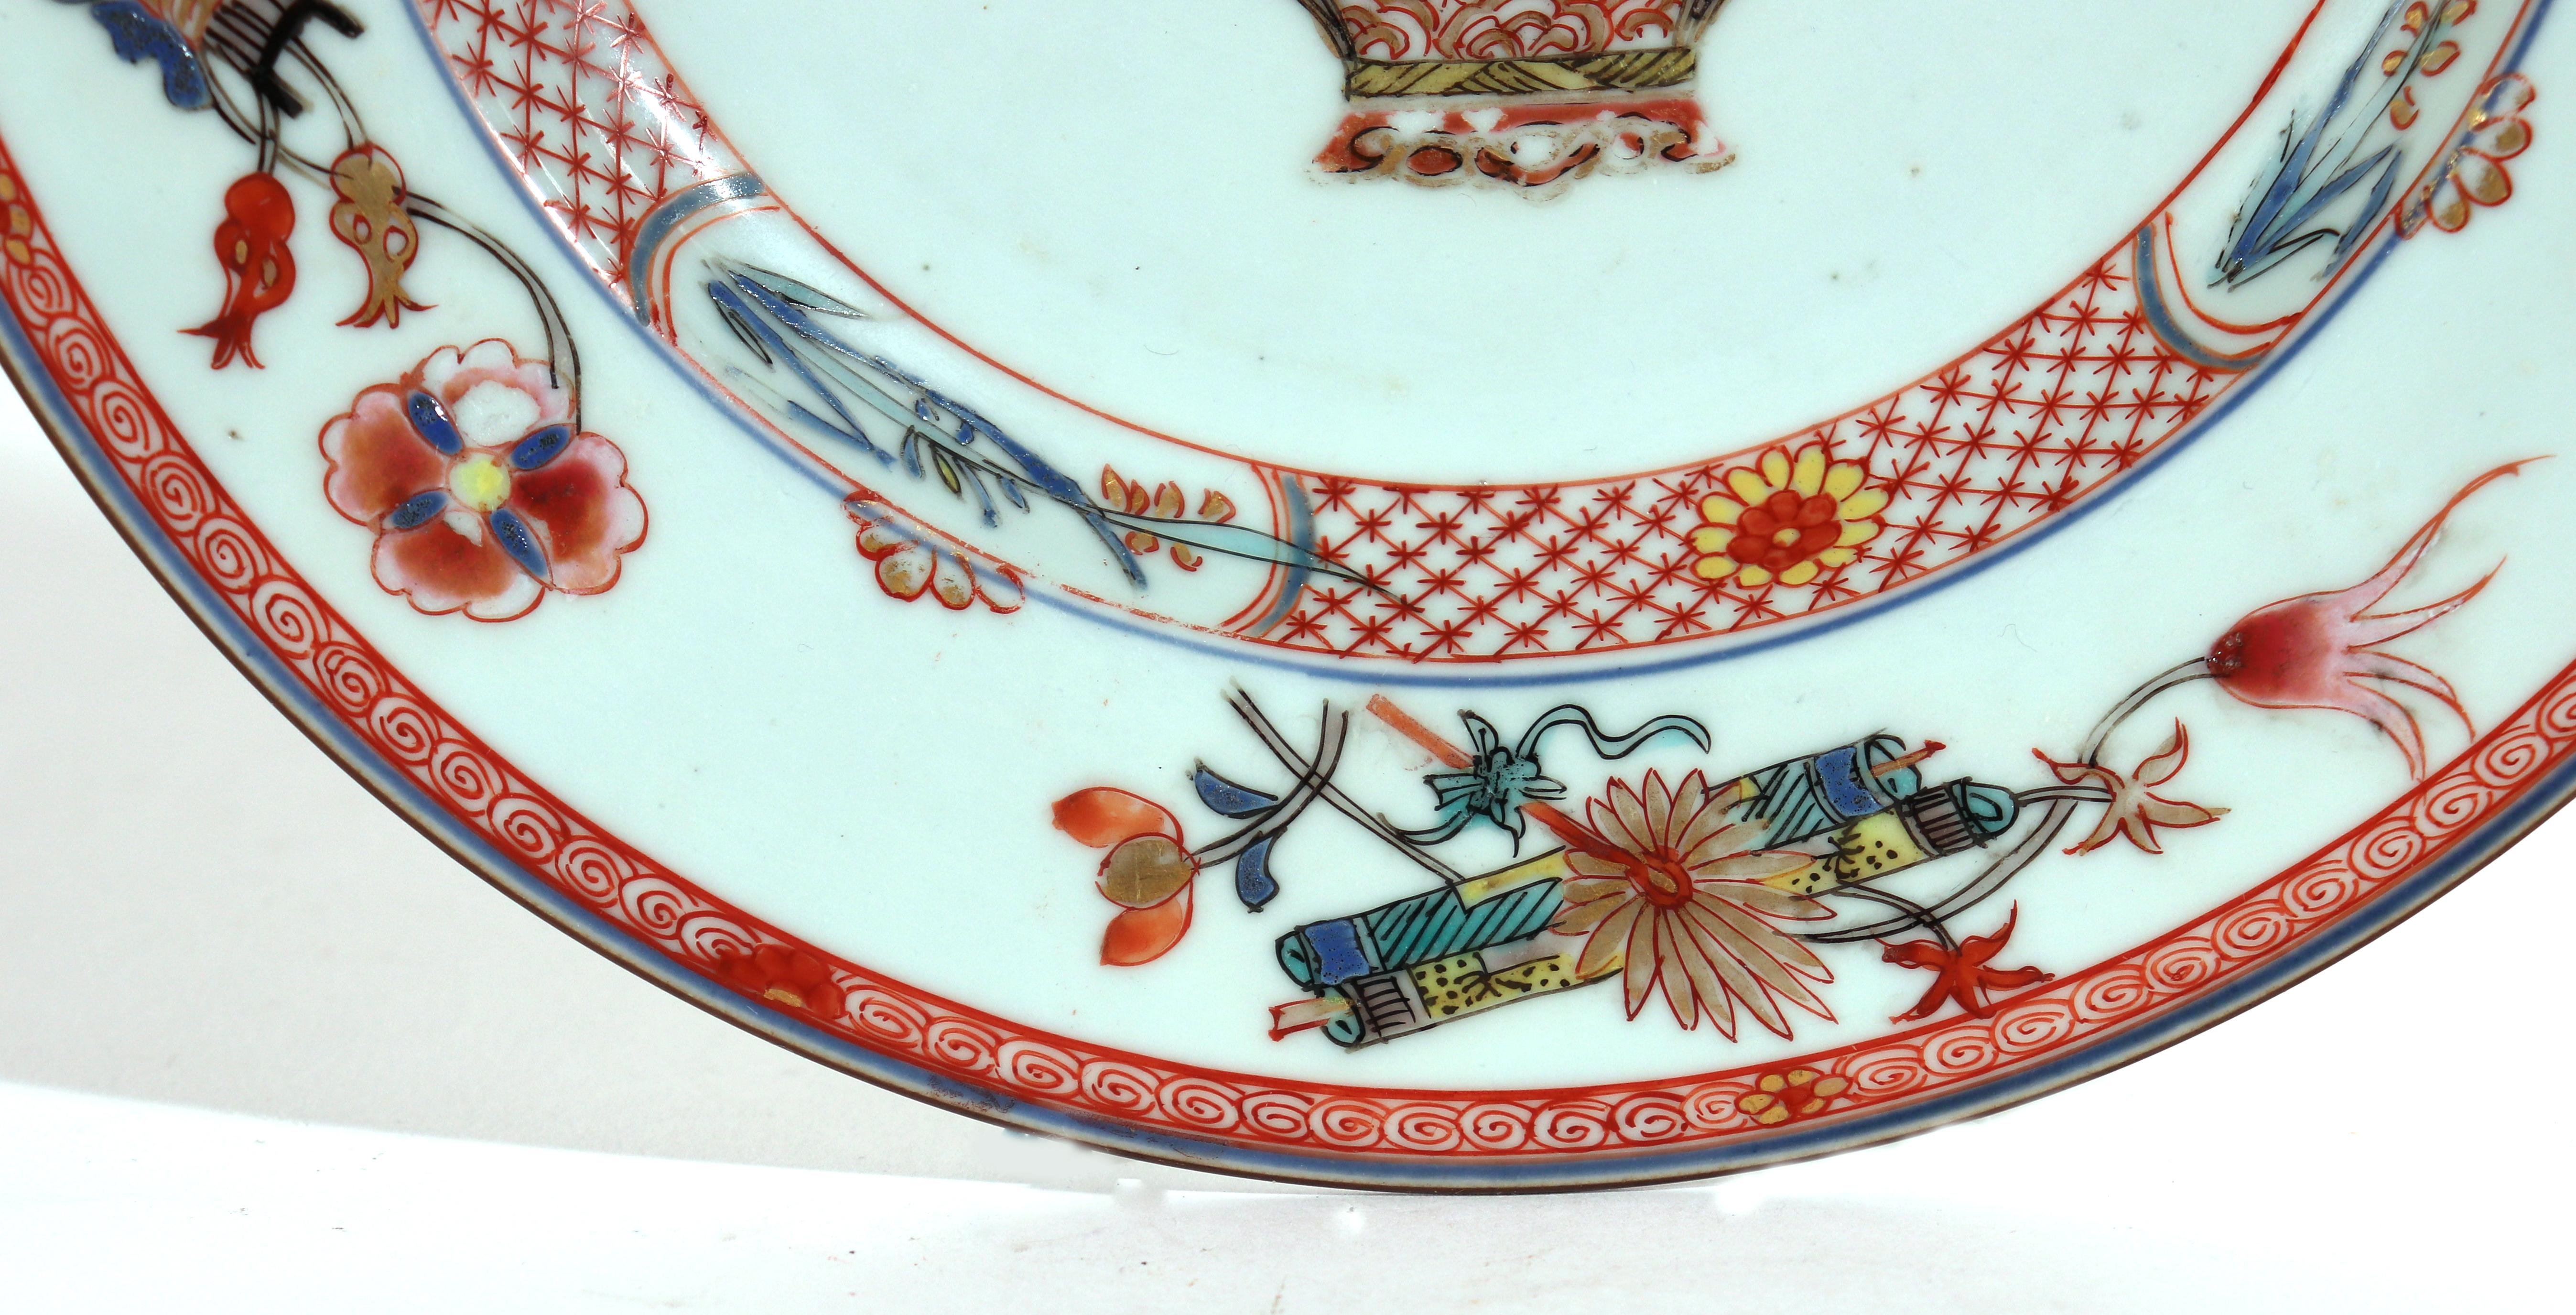 Early 18th Century Chinese Export Porcelain Famille Rose-Verte Plates Painted with A Flower Basket For Sale